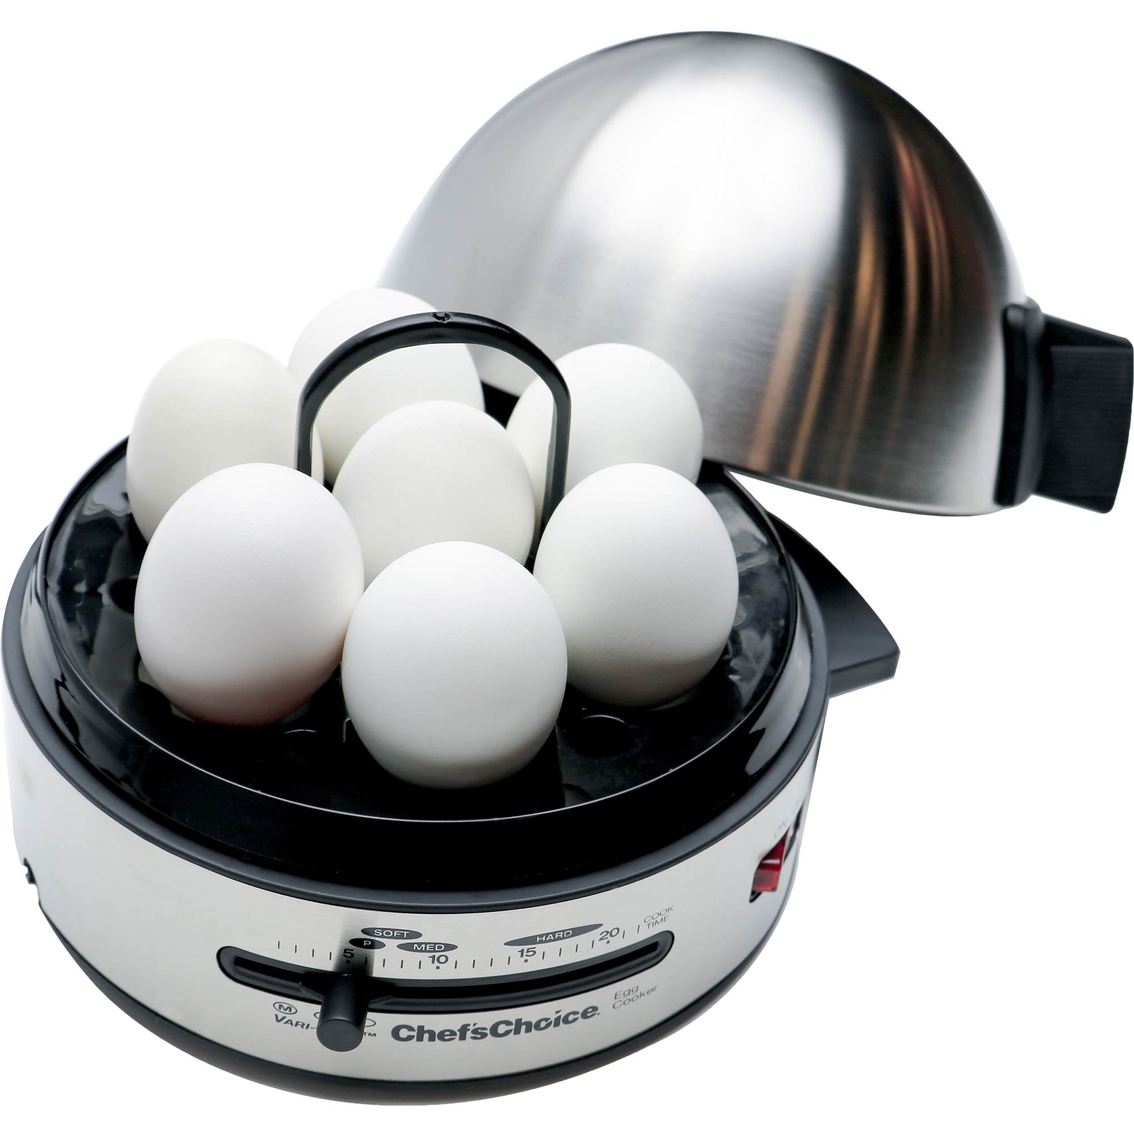 Chef's Choice Gourmet Egg Cooker - Image 5 of 6